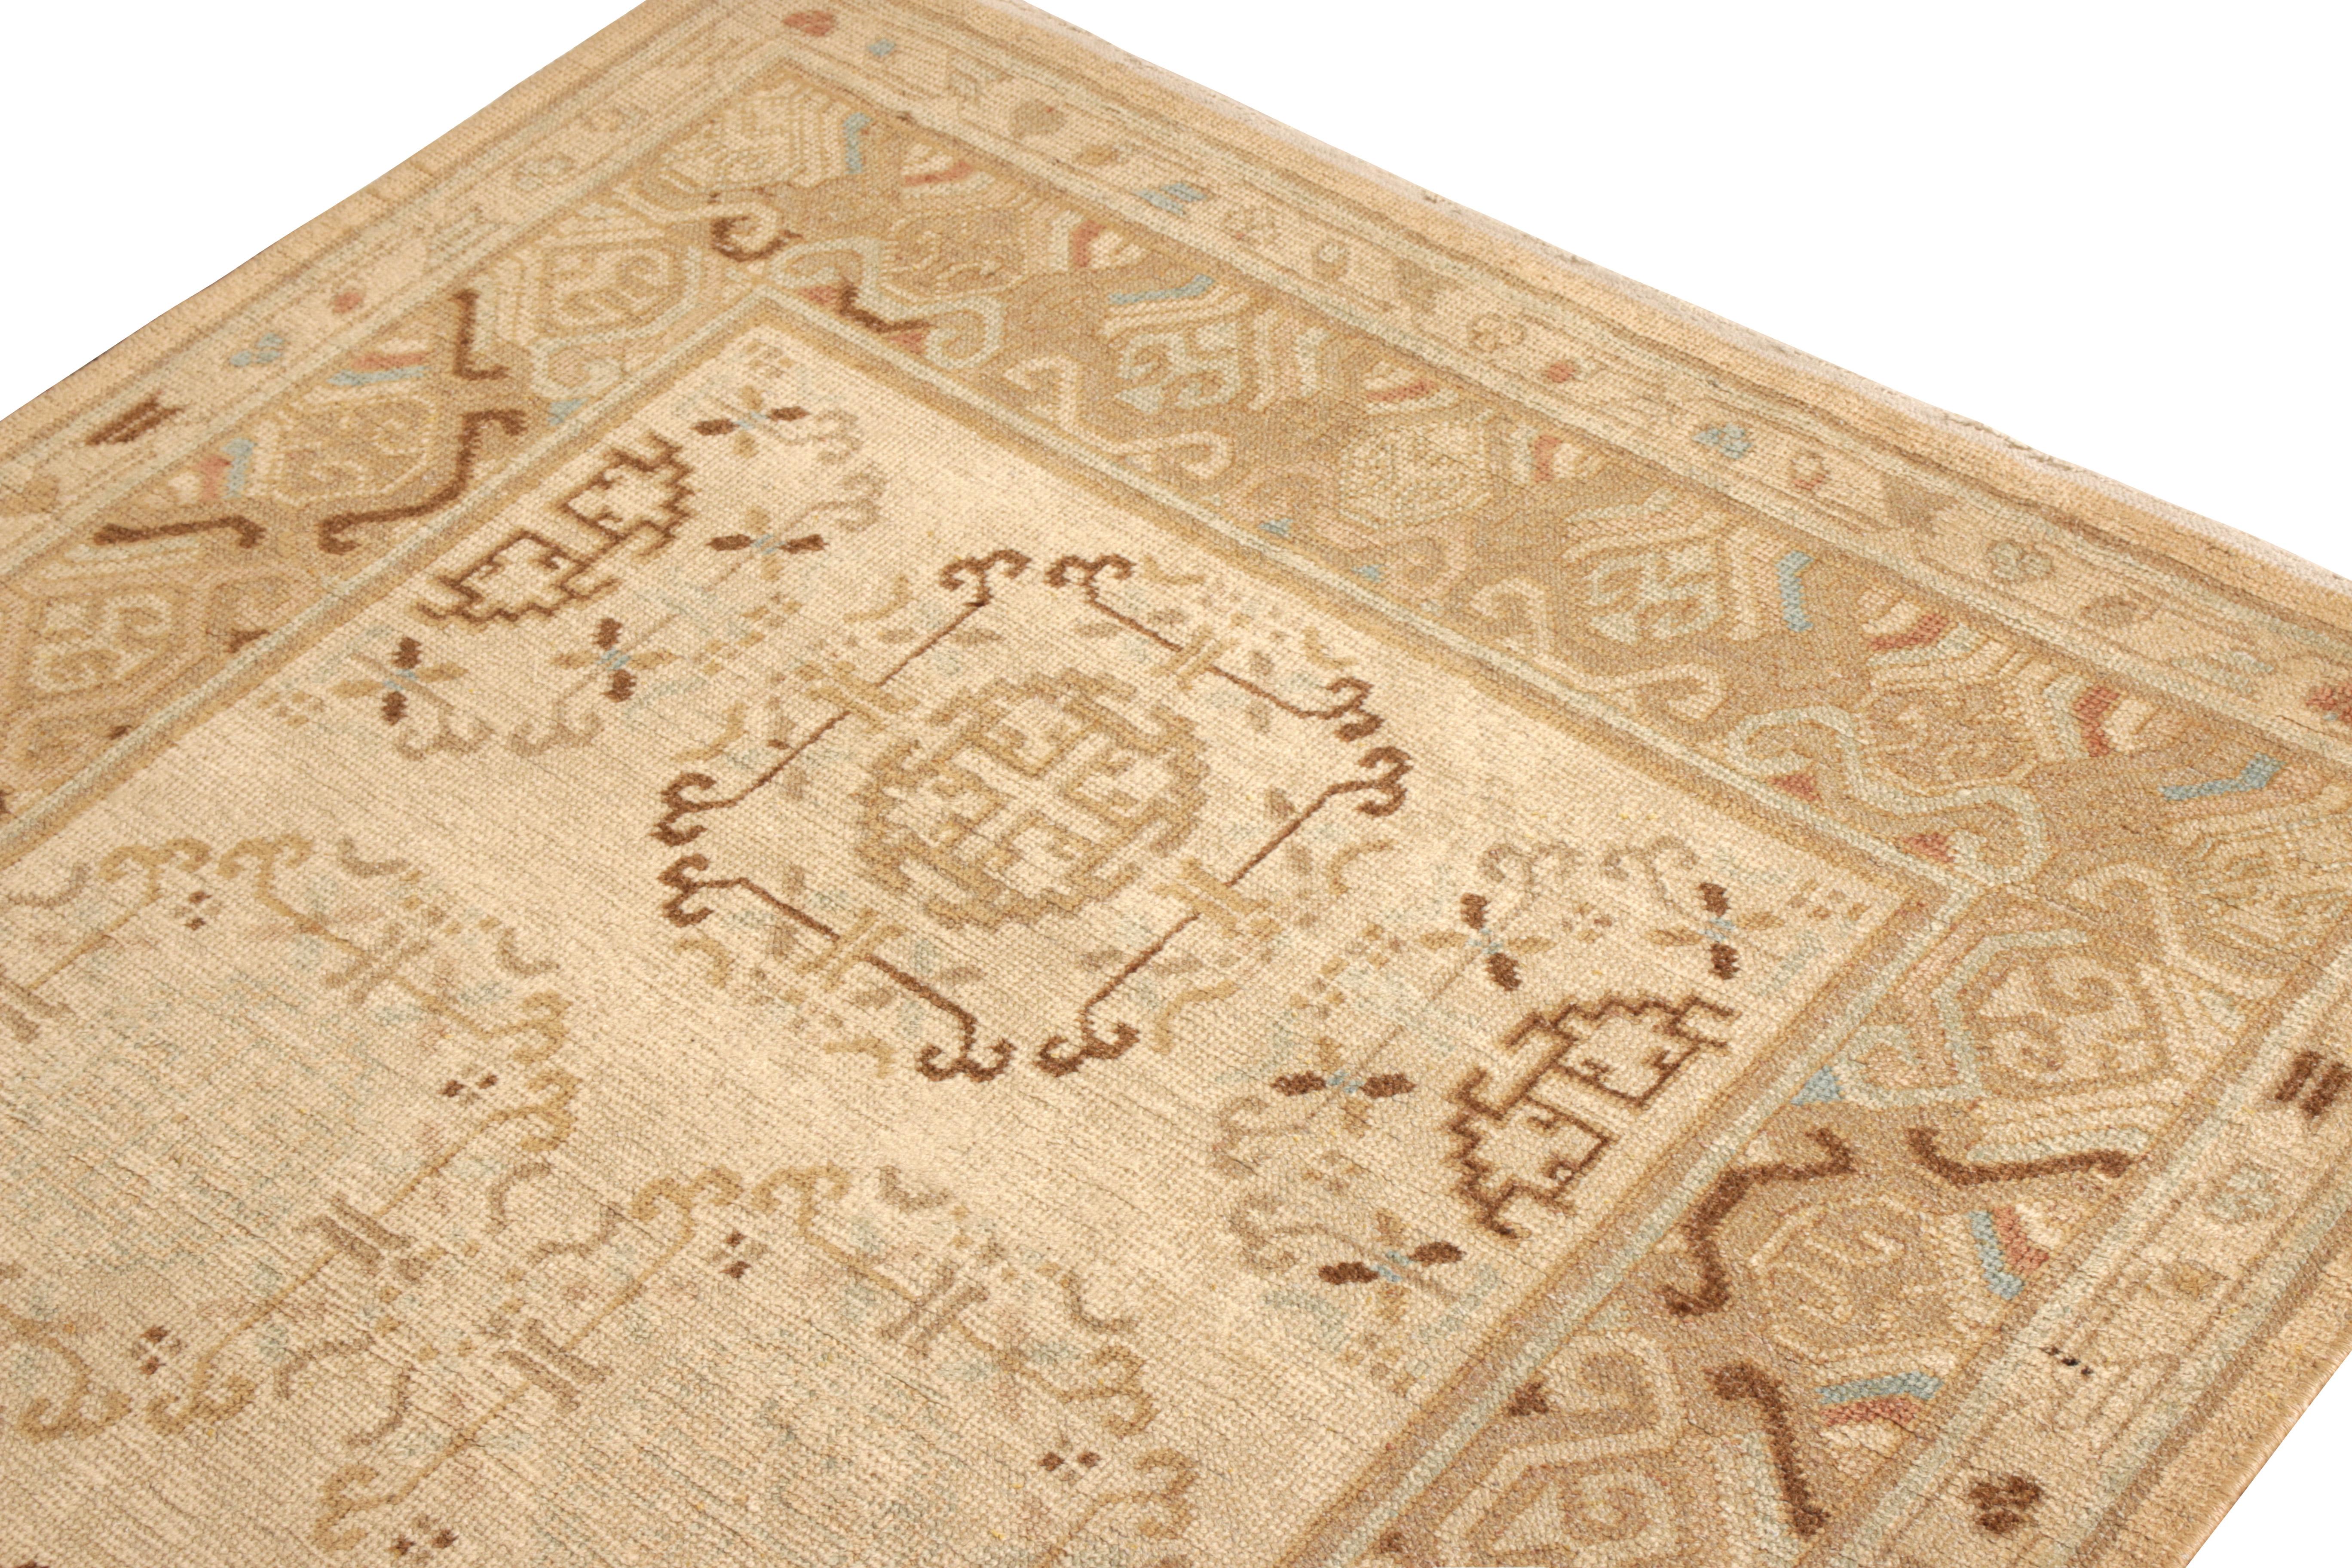 Early 20th Century Hand-Knotted Antique Khotan Rug in Beige-Brown Medallion Pattern For Sale